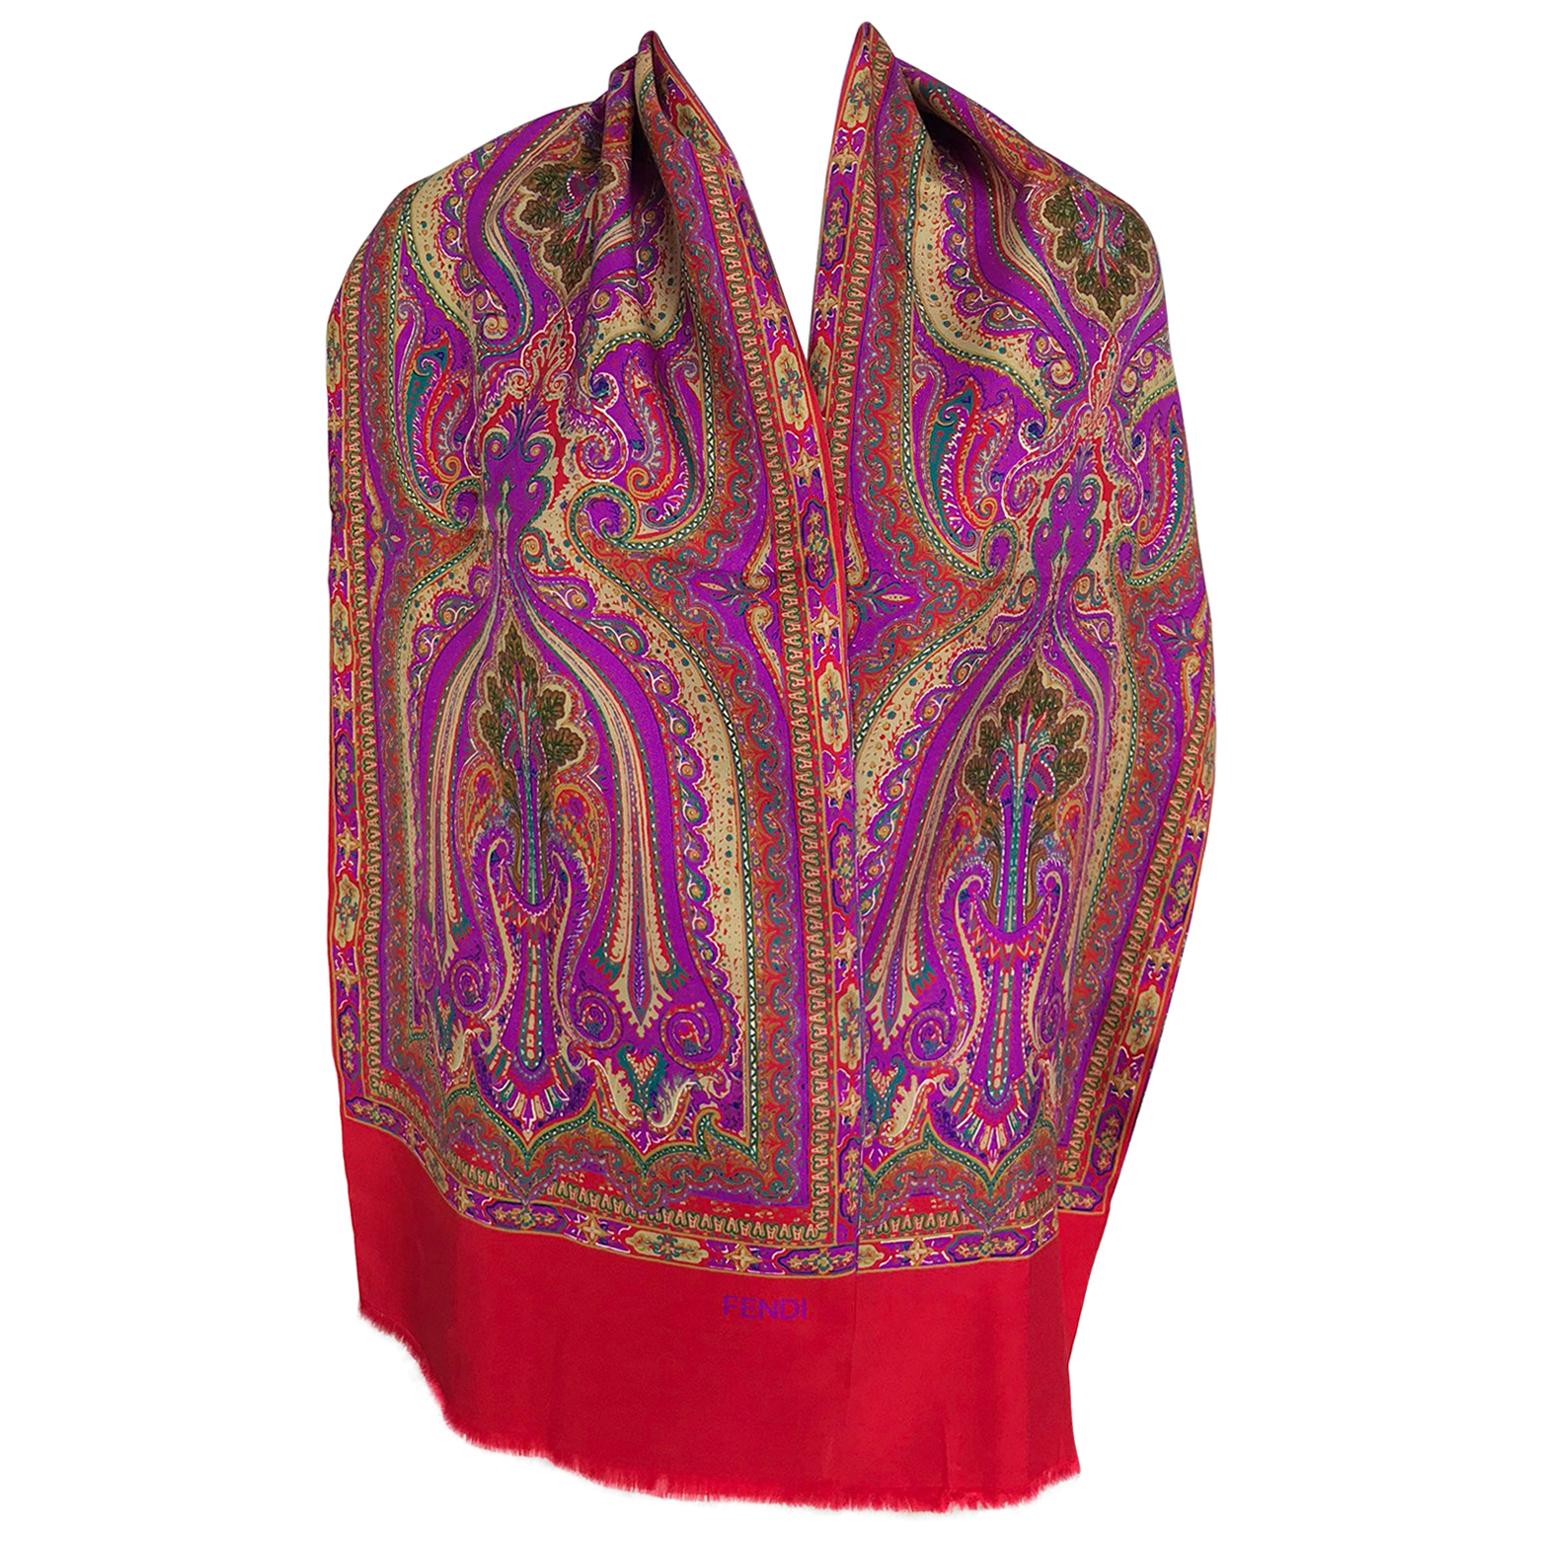 Fendi Paisley Silk Oblong Scarf in Reds and Fuchsia 